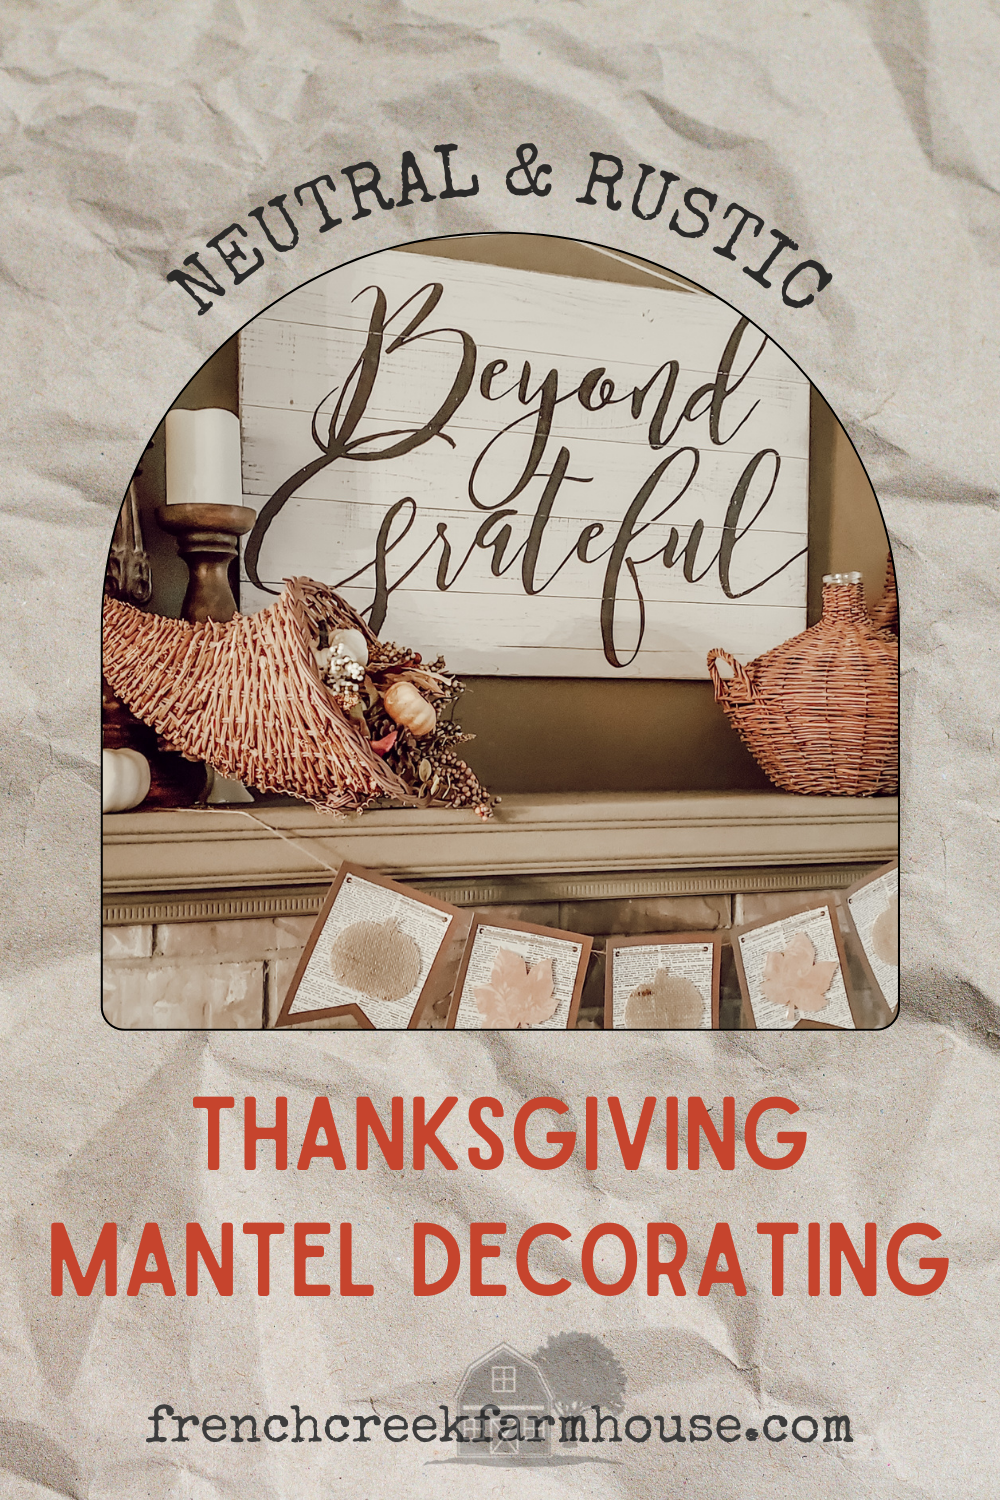 Design and decorate a Thanksgiving mantel with a neutral color palette for cozy elegance and sophisticated charm.